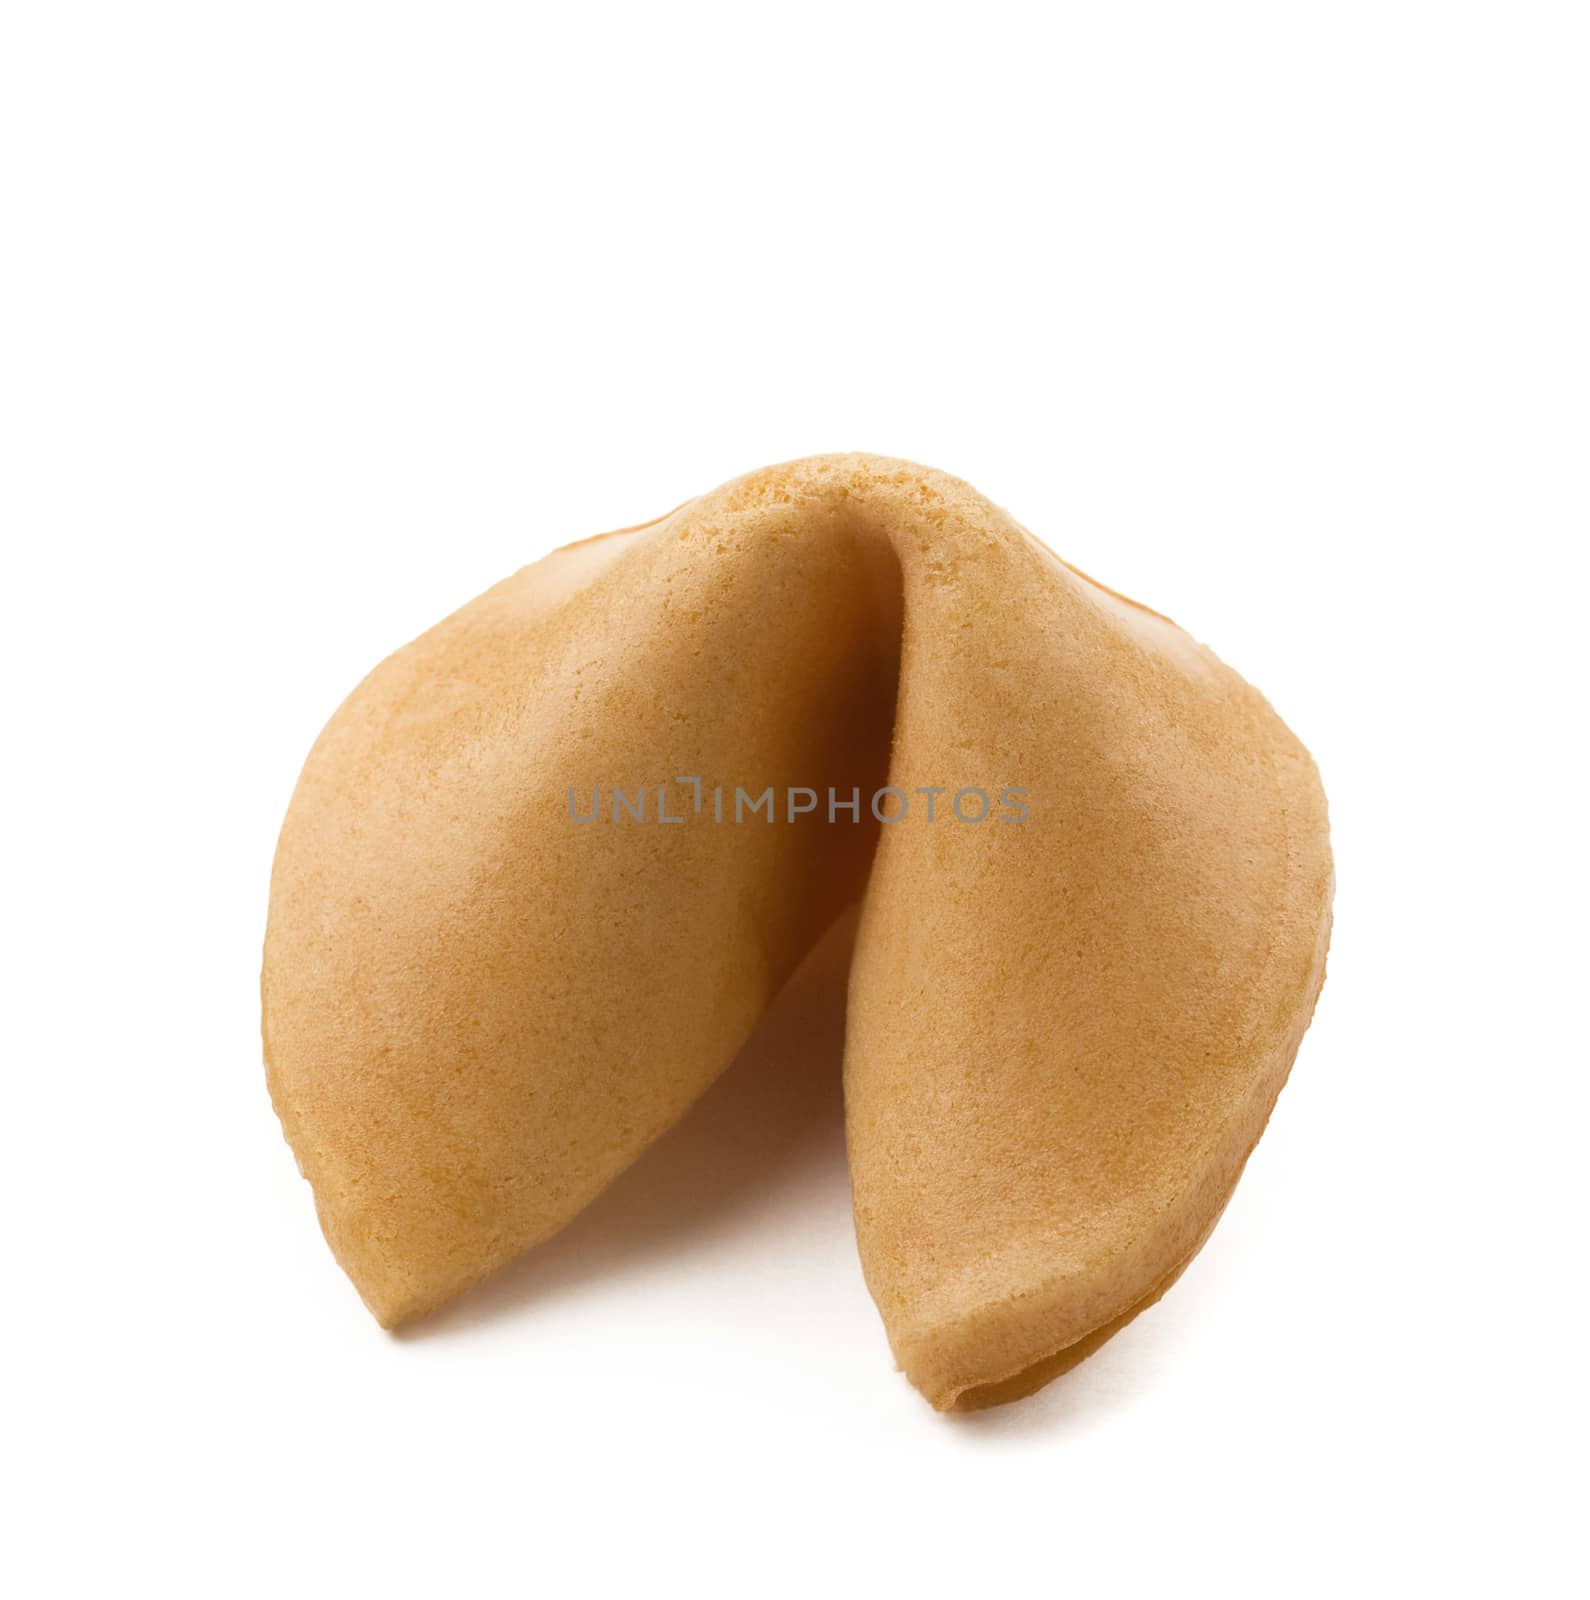 fortune cookie on a white background.